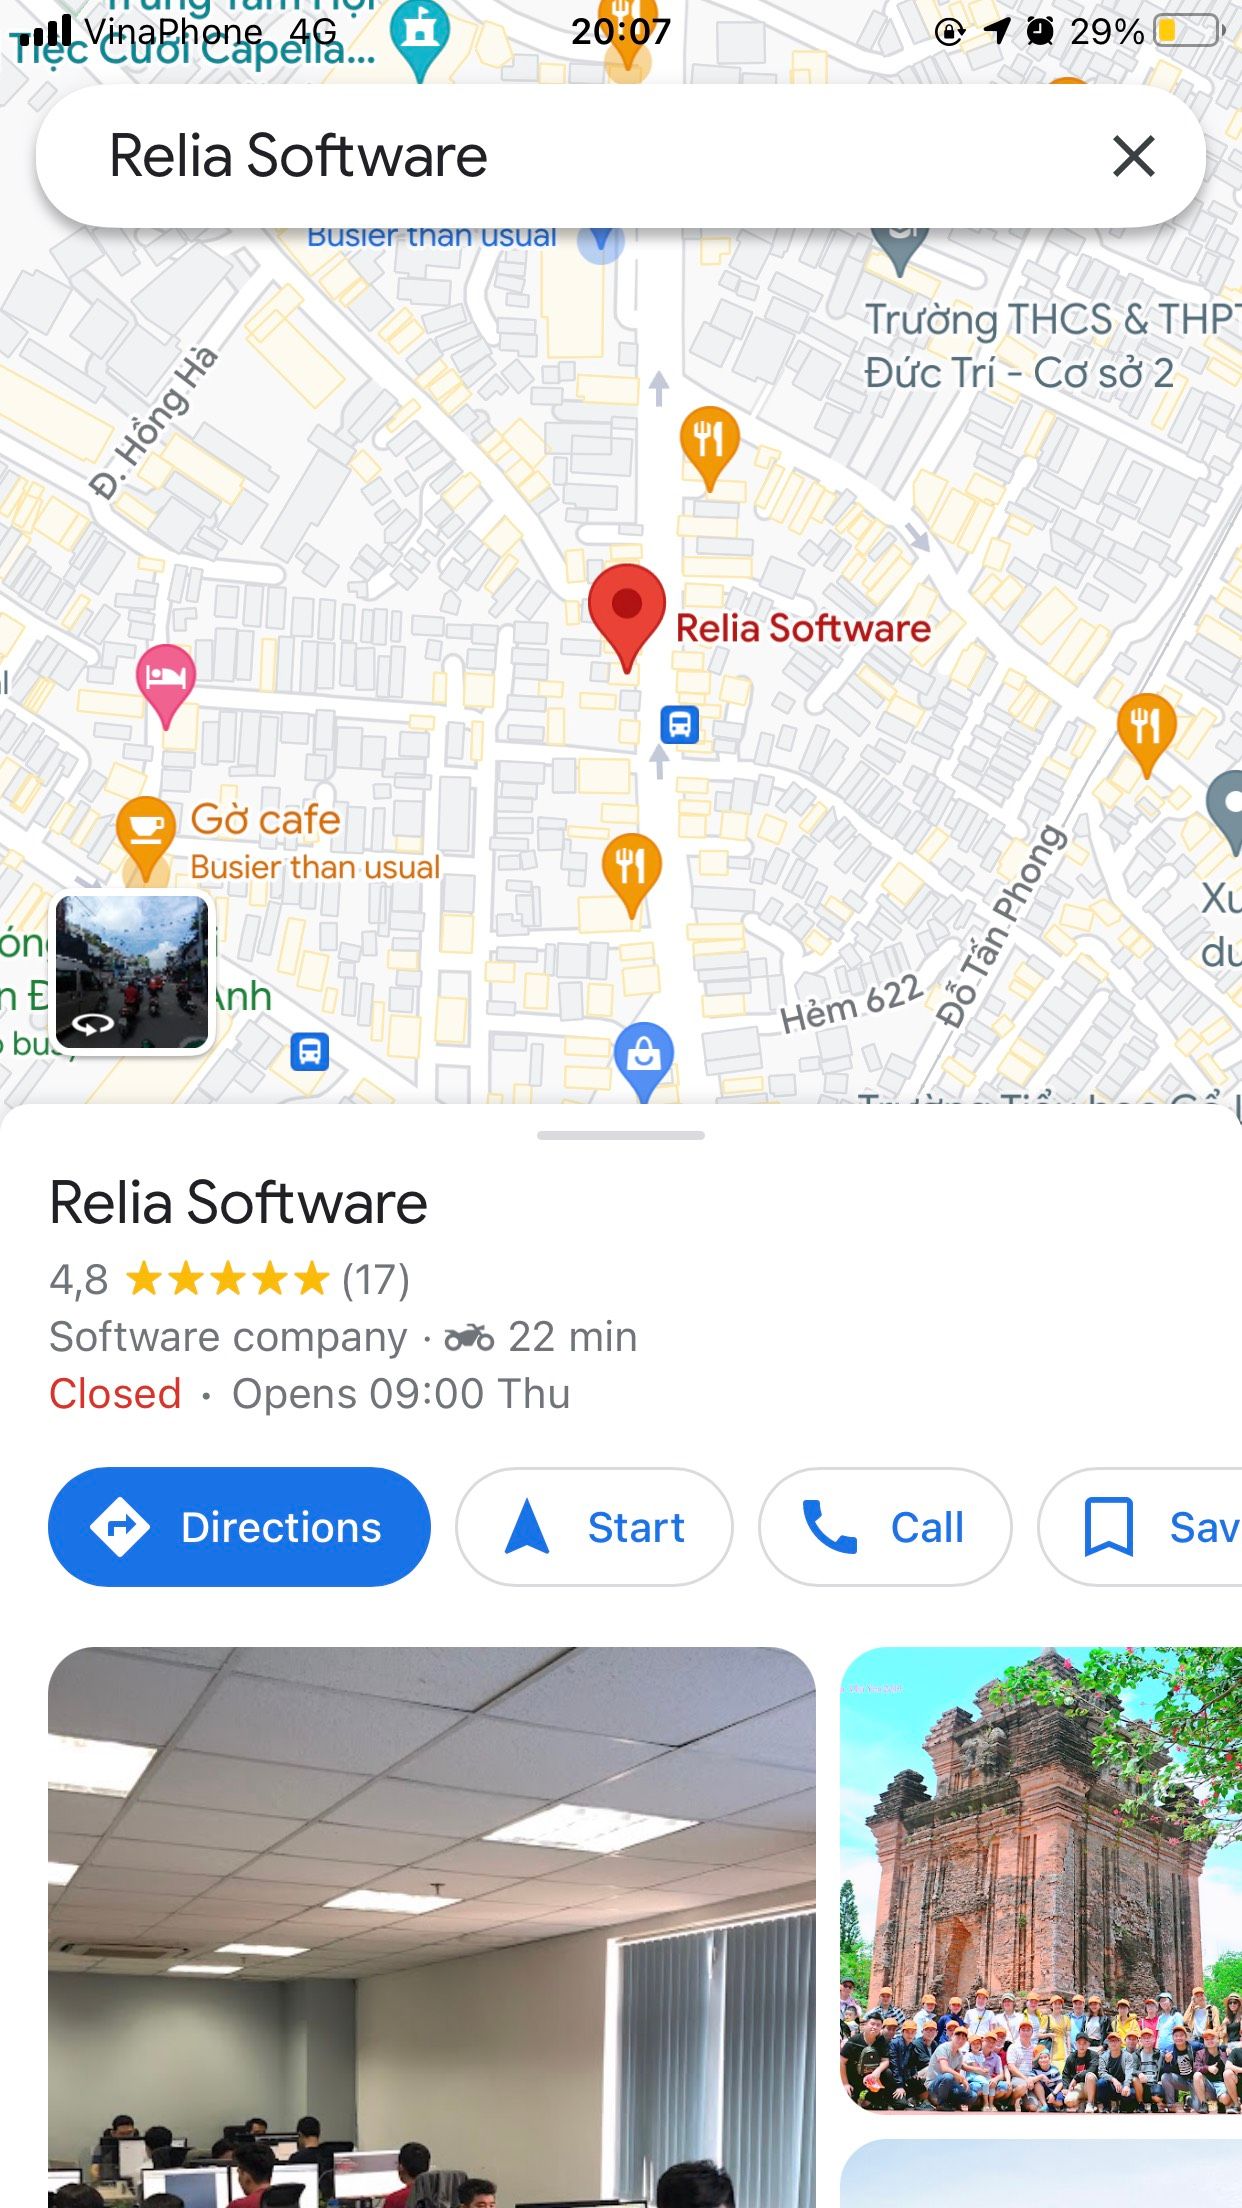 relia software in google maps